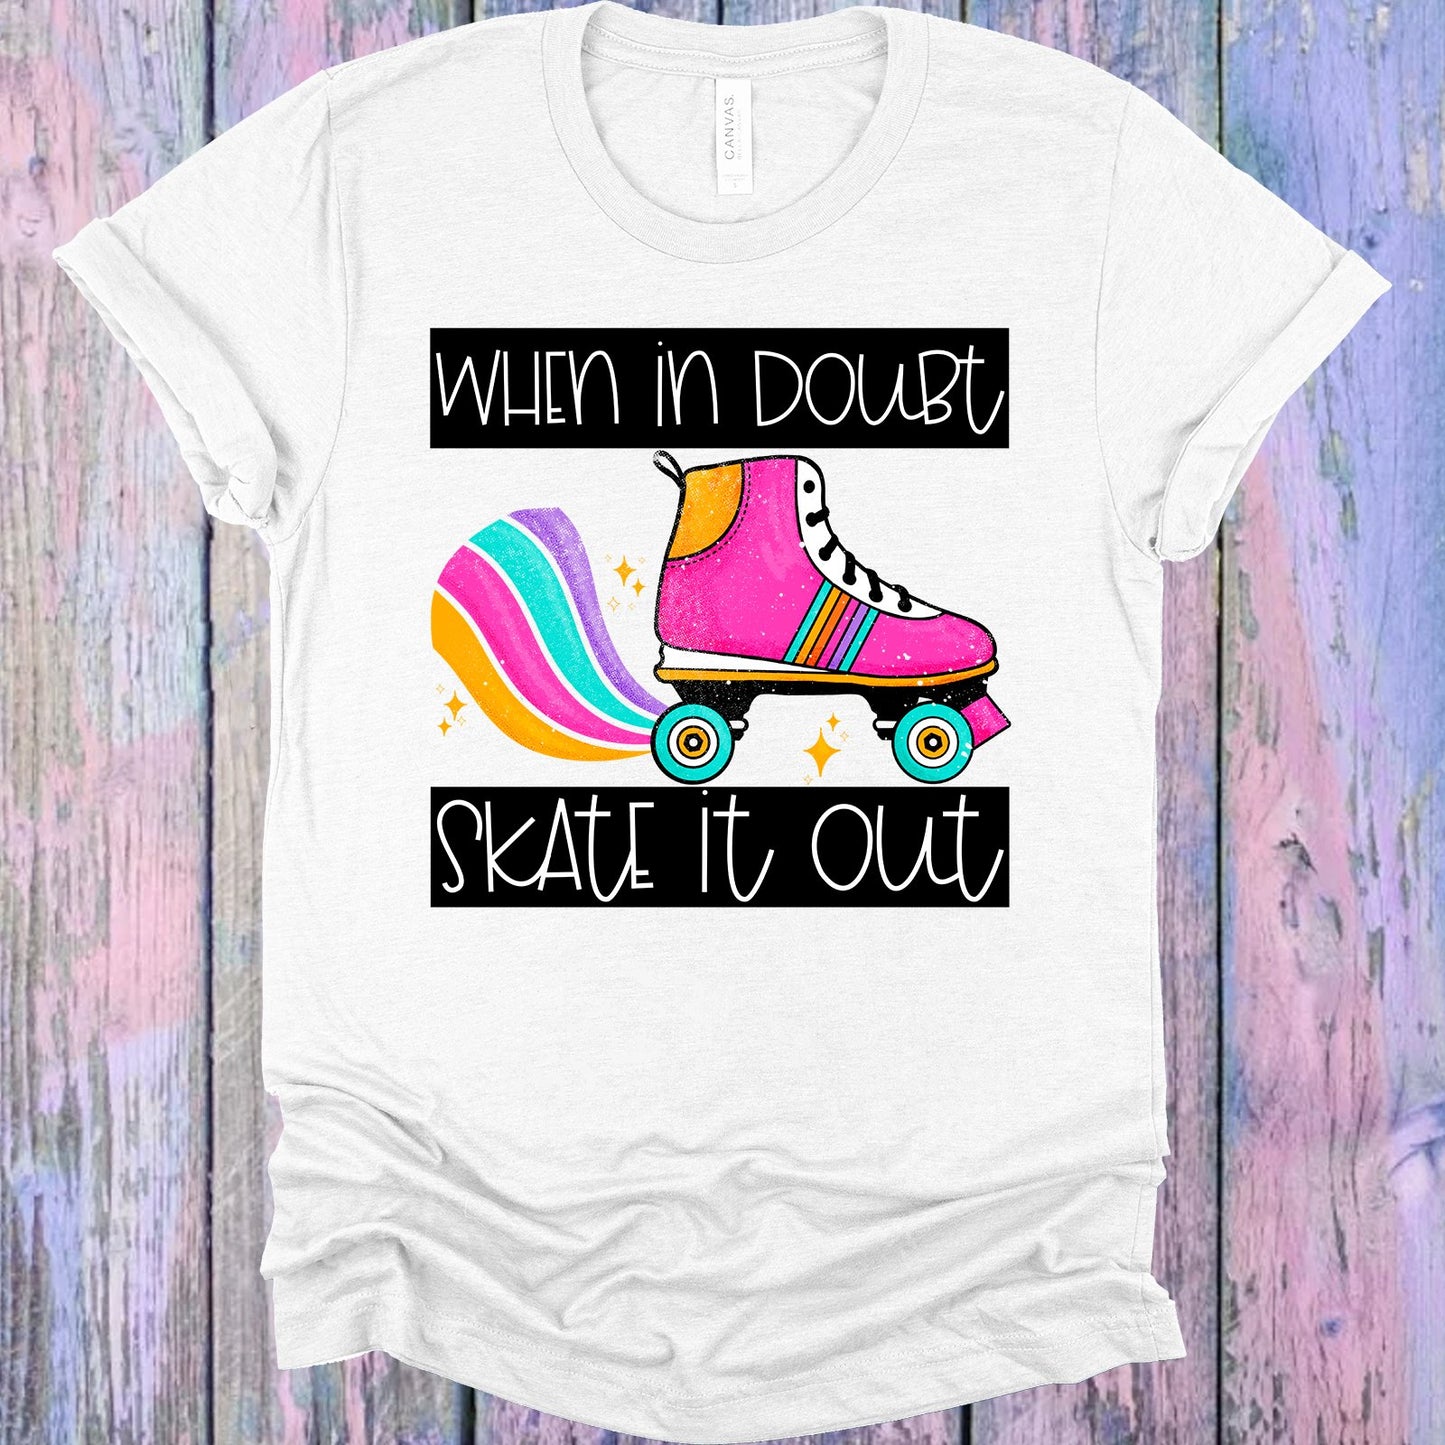 When In Doubt Skate It Out Graphic Tee Graphic Tee